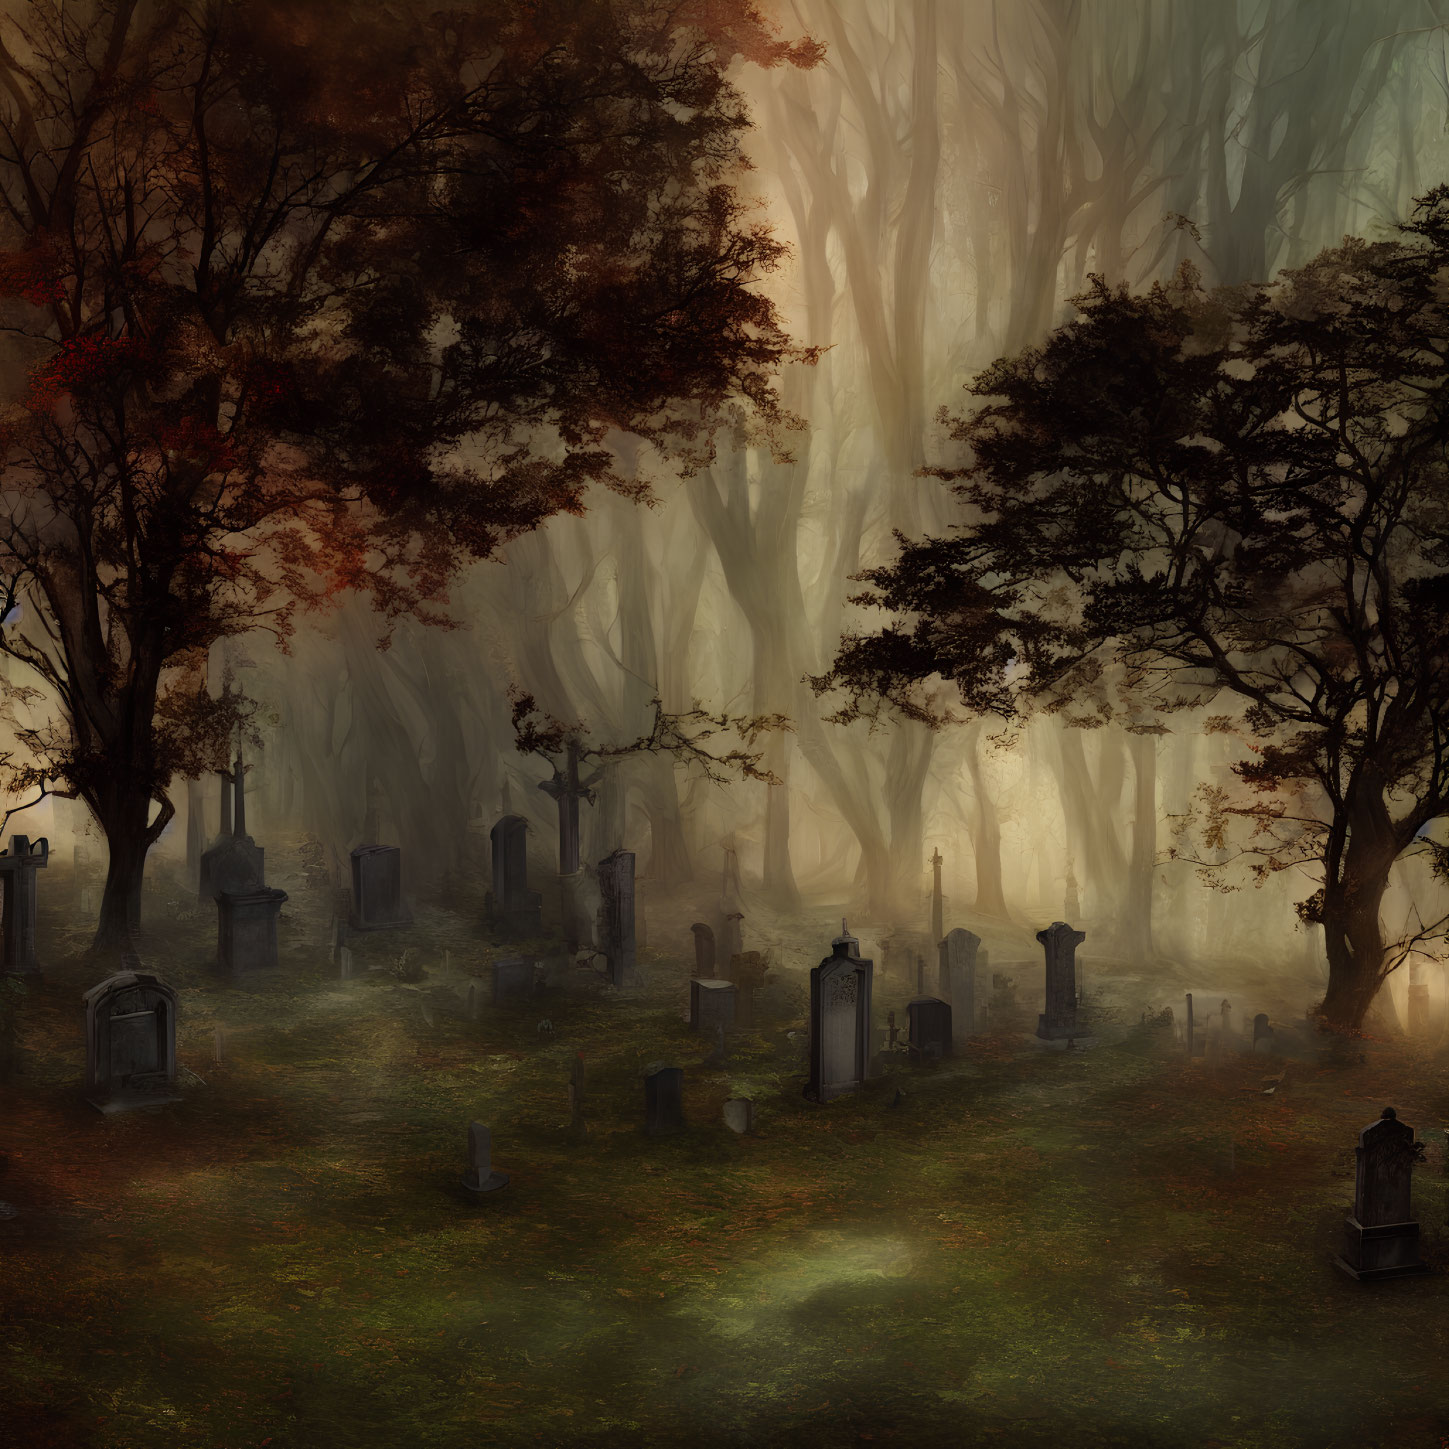 Foggy graveyard in autumn forest with tall ghostly trees